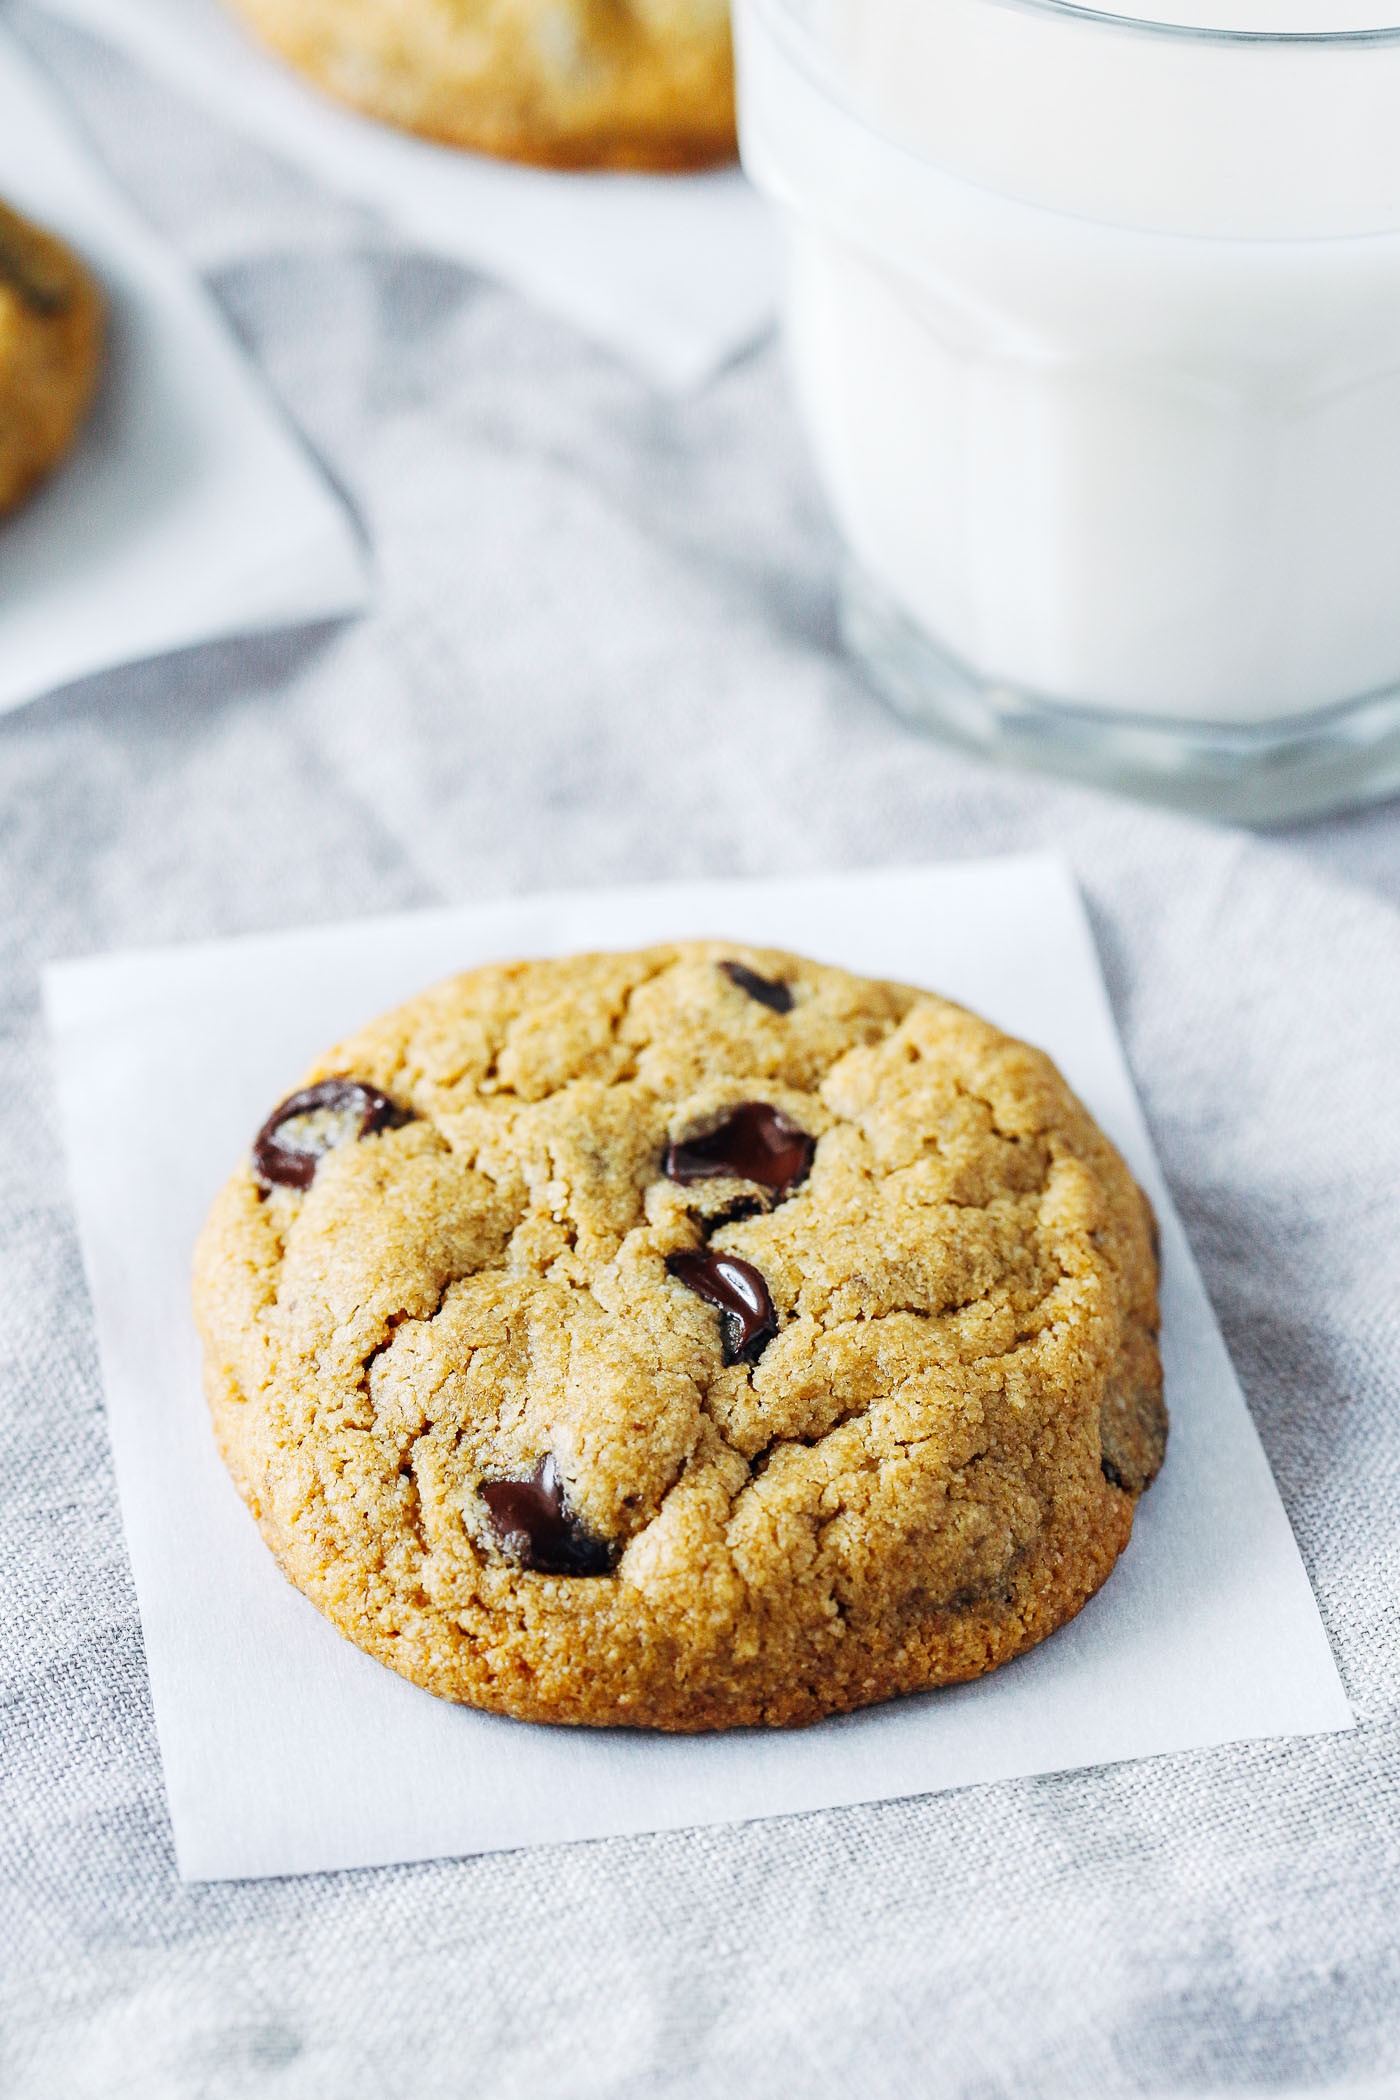 Gluten And Dairy Free Chocolate Chip Cookies The Best Vegan and Gluten free Chocolate Chip Cookies